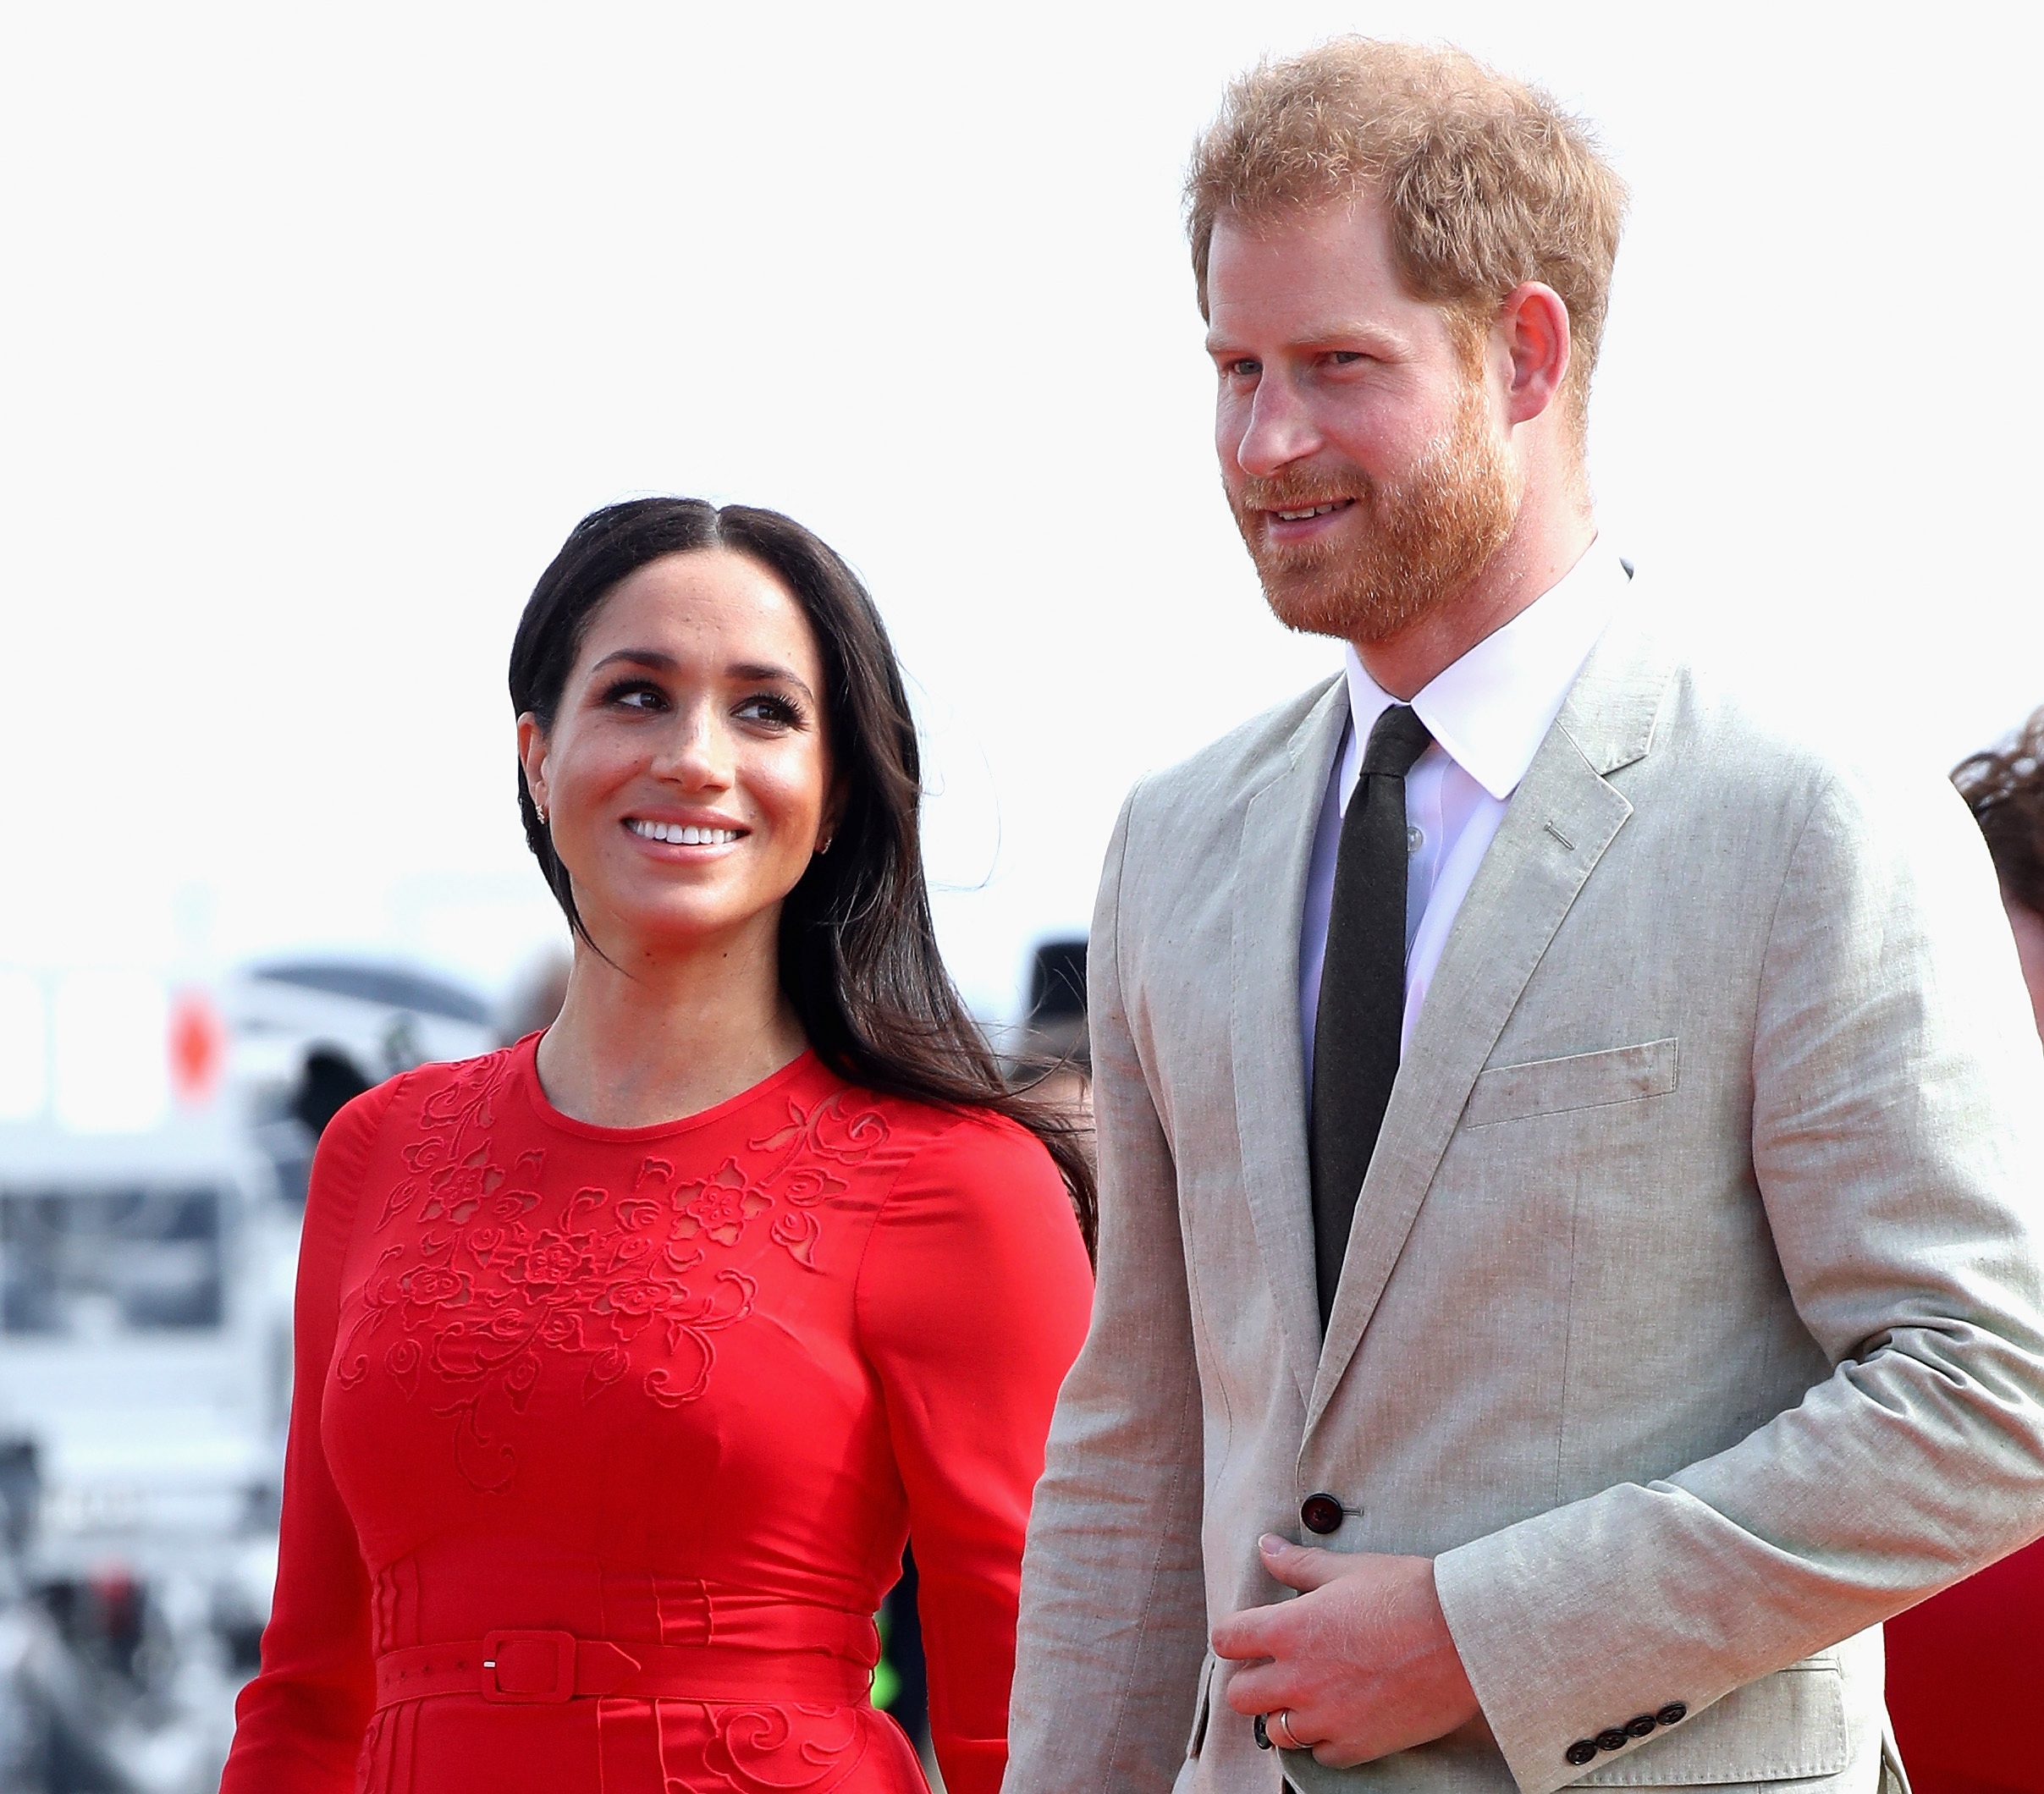 Meghan Markle donning a red dress as she smiles at Prince Harry upon arrival in Tonga